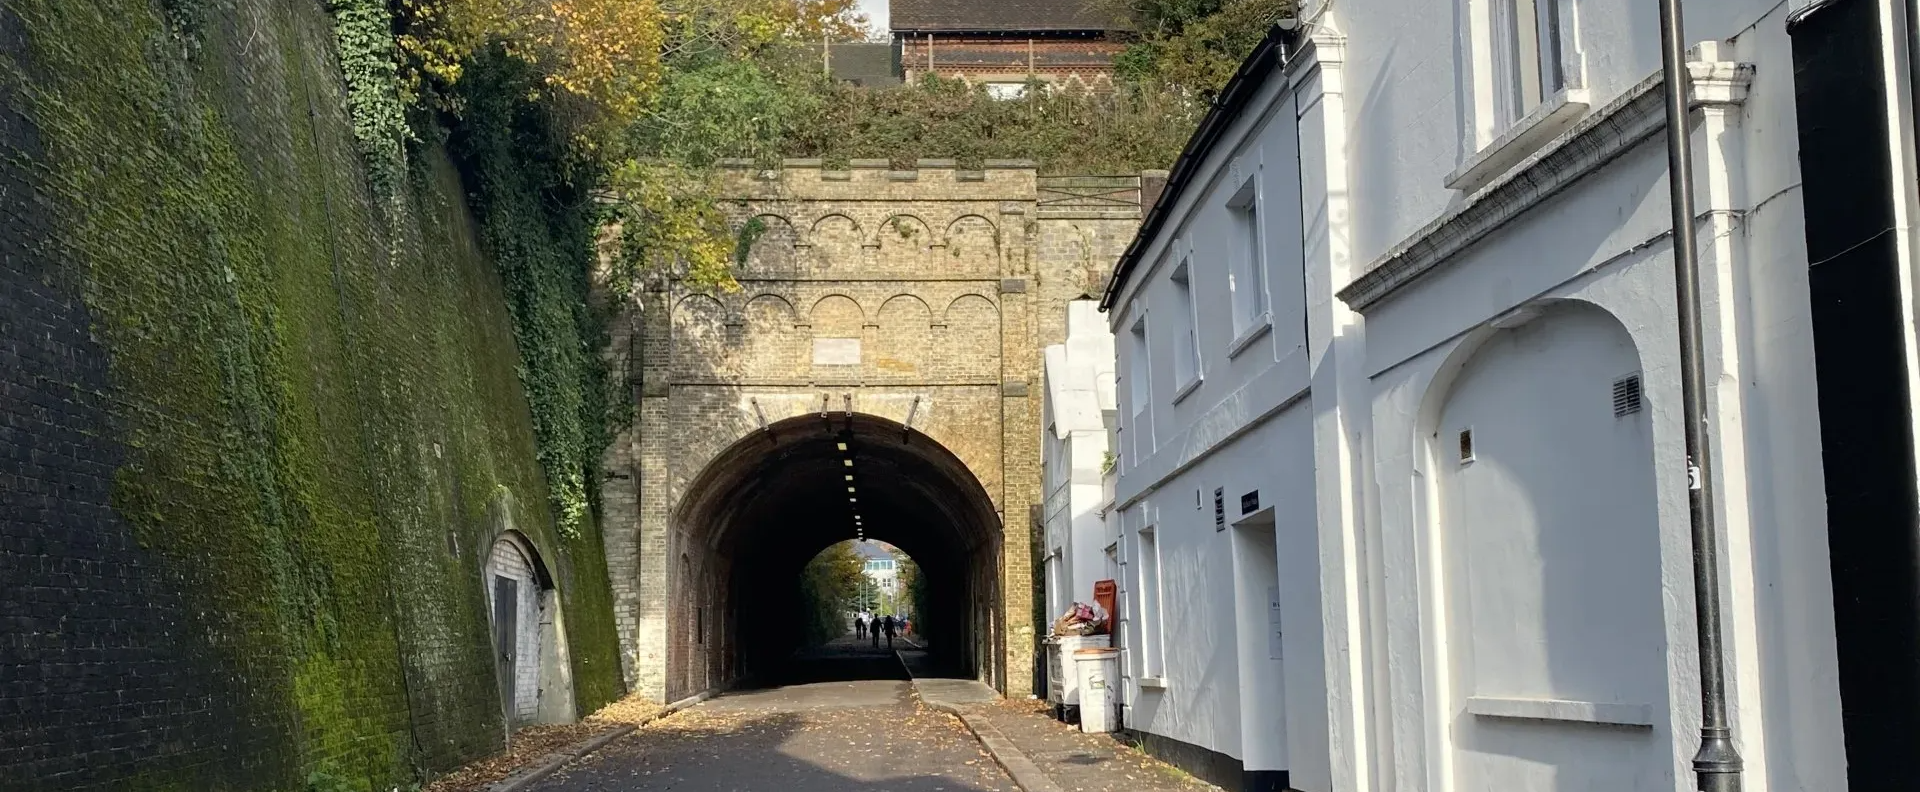 Photo of Reigate's Tunnel